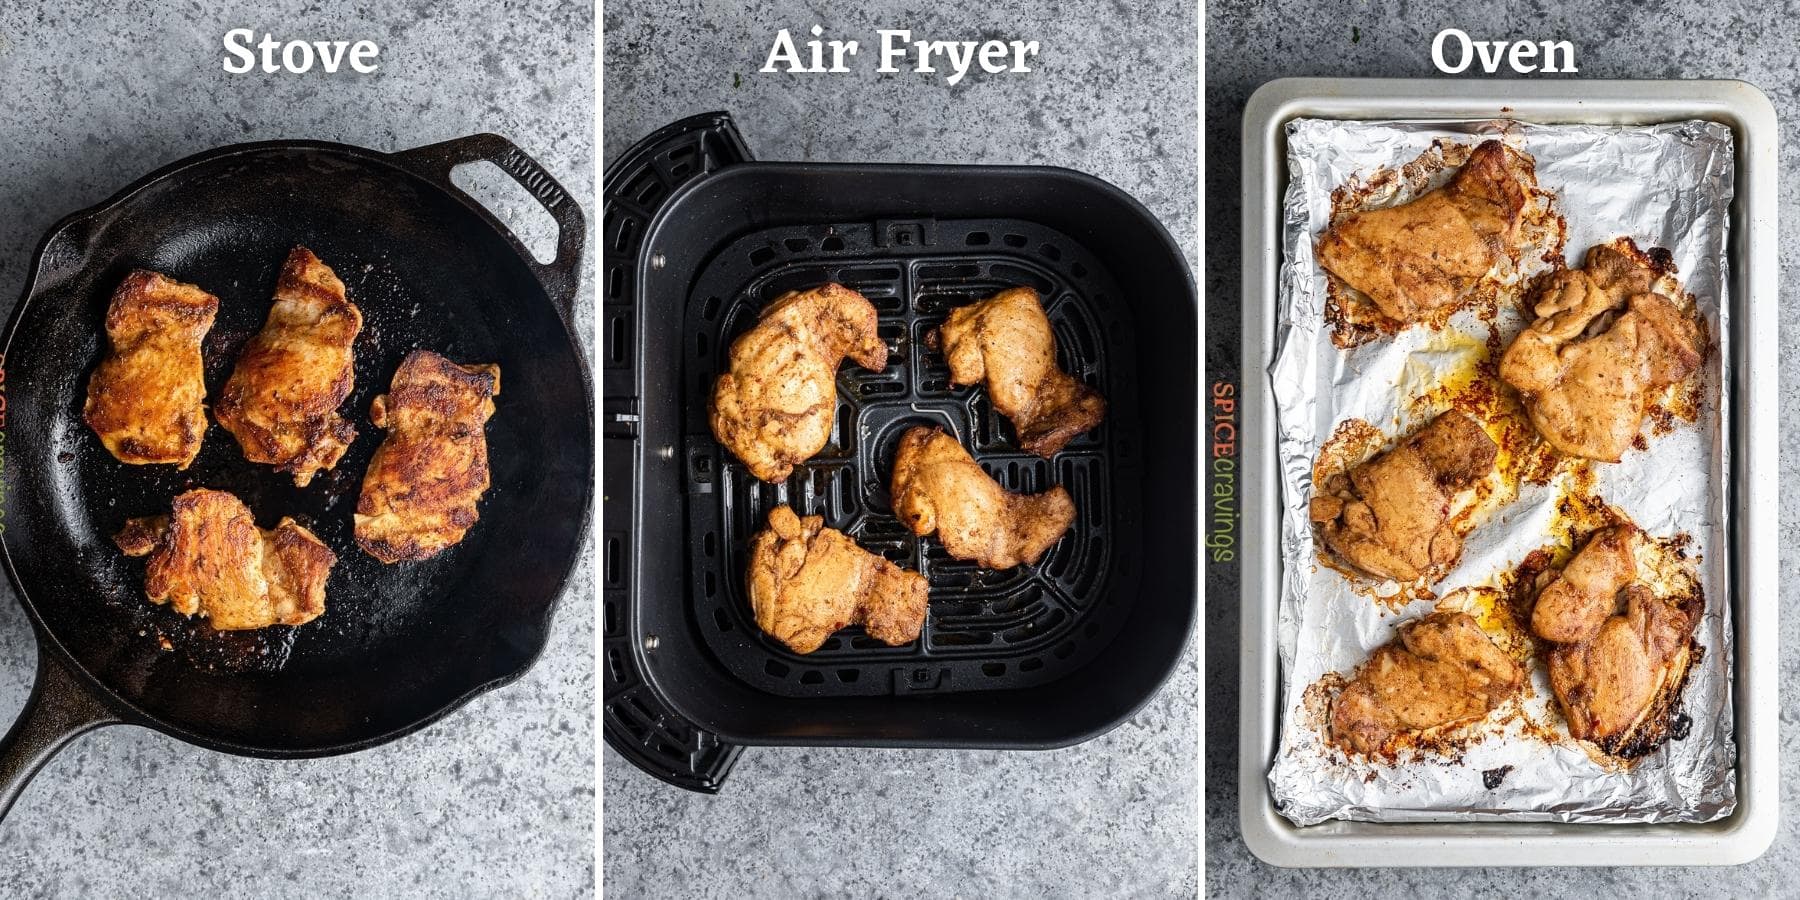 three step grid cooking chicken thighs in skillet, air fyer, oven